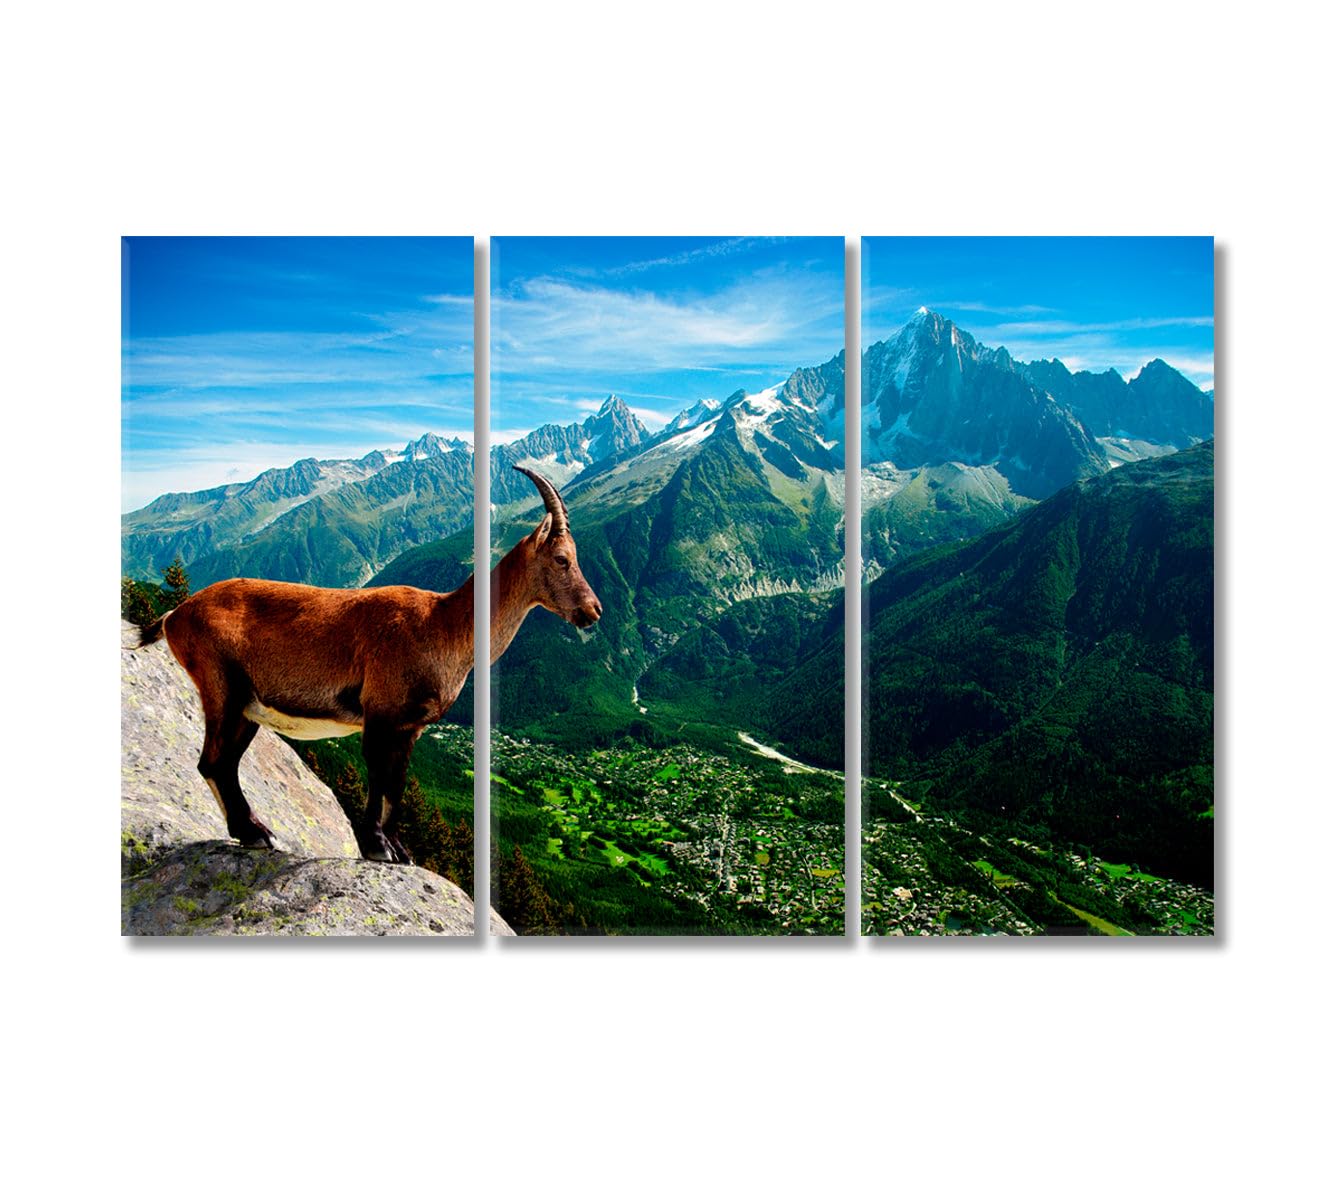 Mountain Goat Looks at Landscape Canvas Print 5 Panels / 36x24 inches